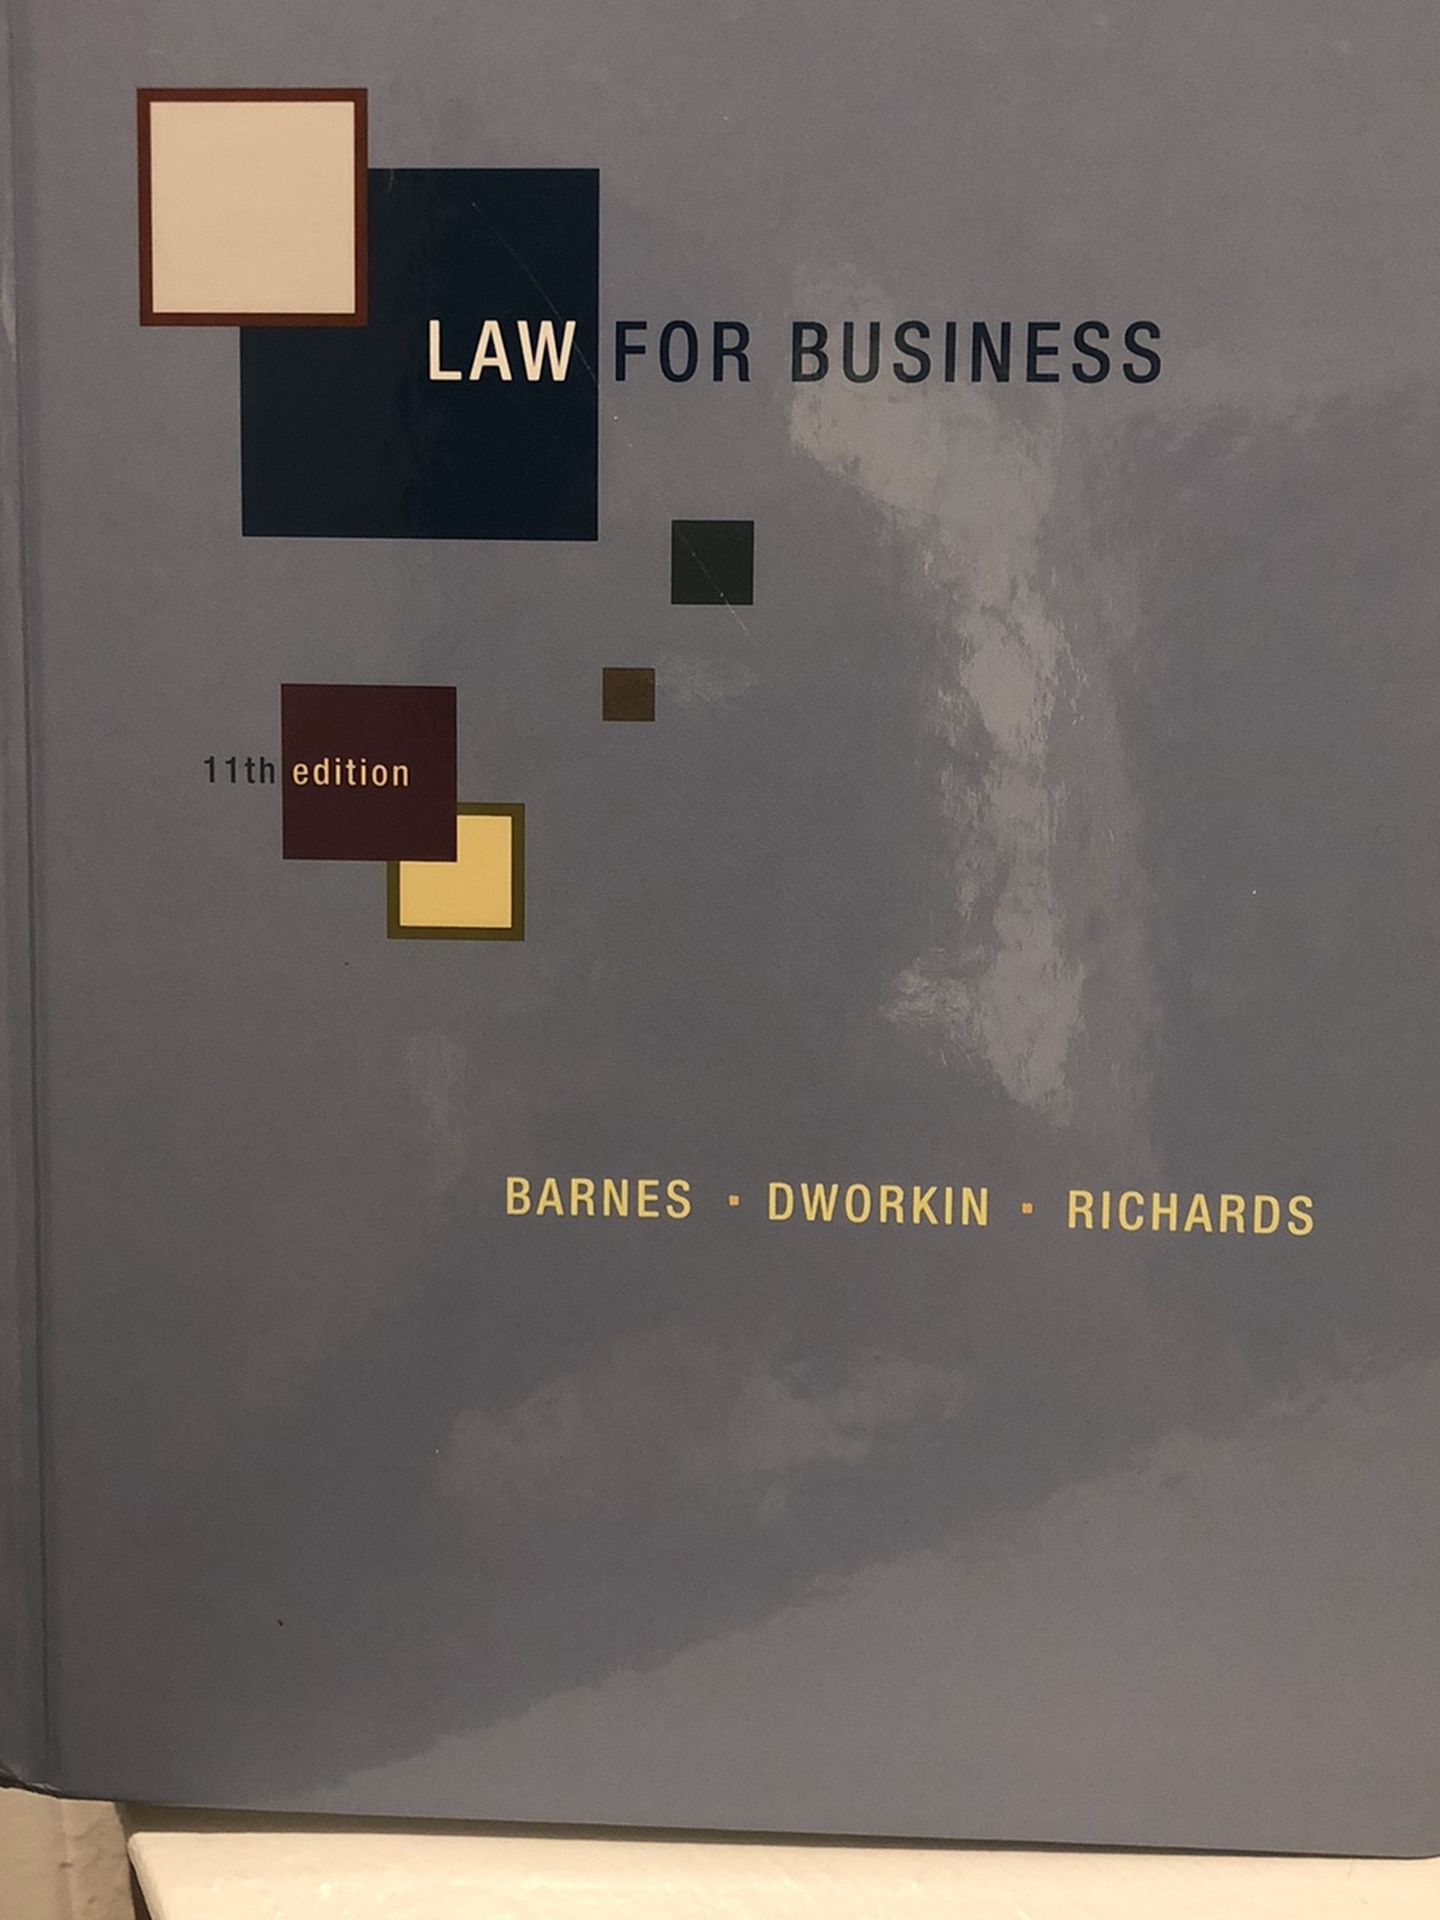 Law for Business Edition 11